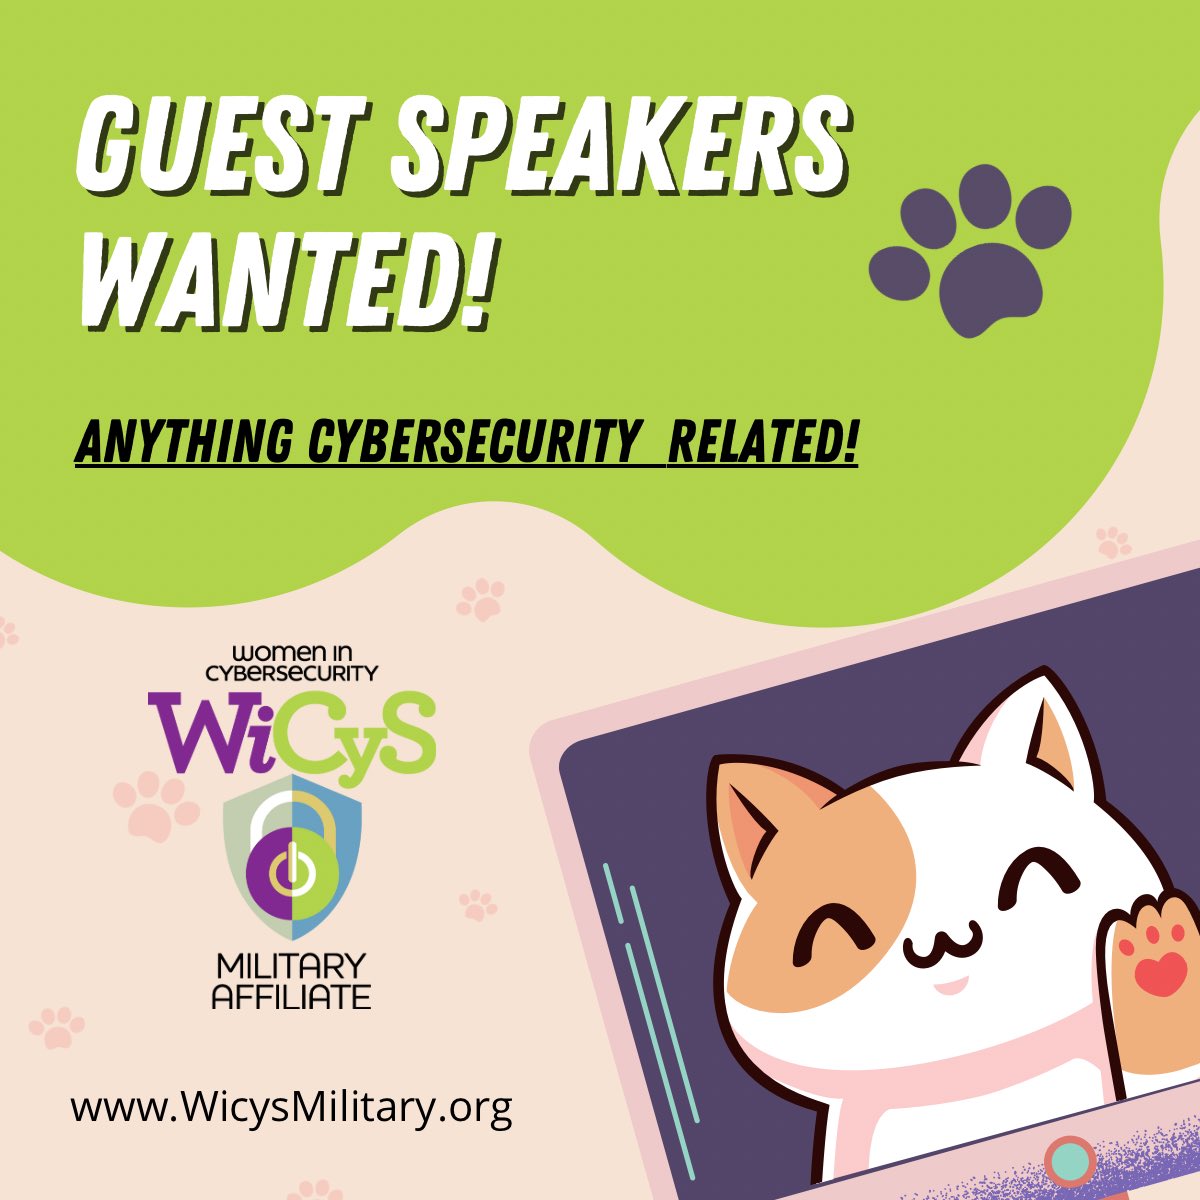 Are you interested in speaking at one of our monthly member meetings? 

Send us an email at: wicysmilitary@wicys.org

We’d love to hear from you!
#womenincybersecurity #veterans #militaryspouses #military @WiCySorg